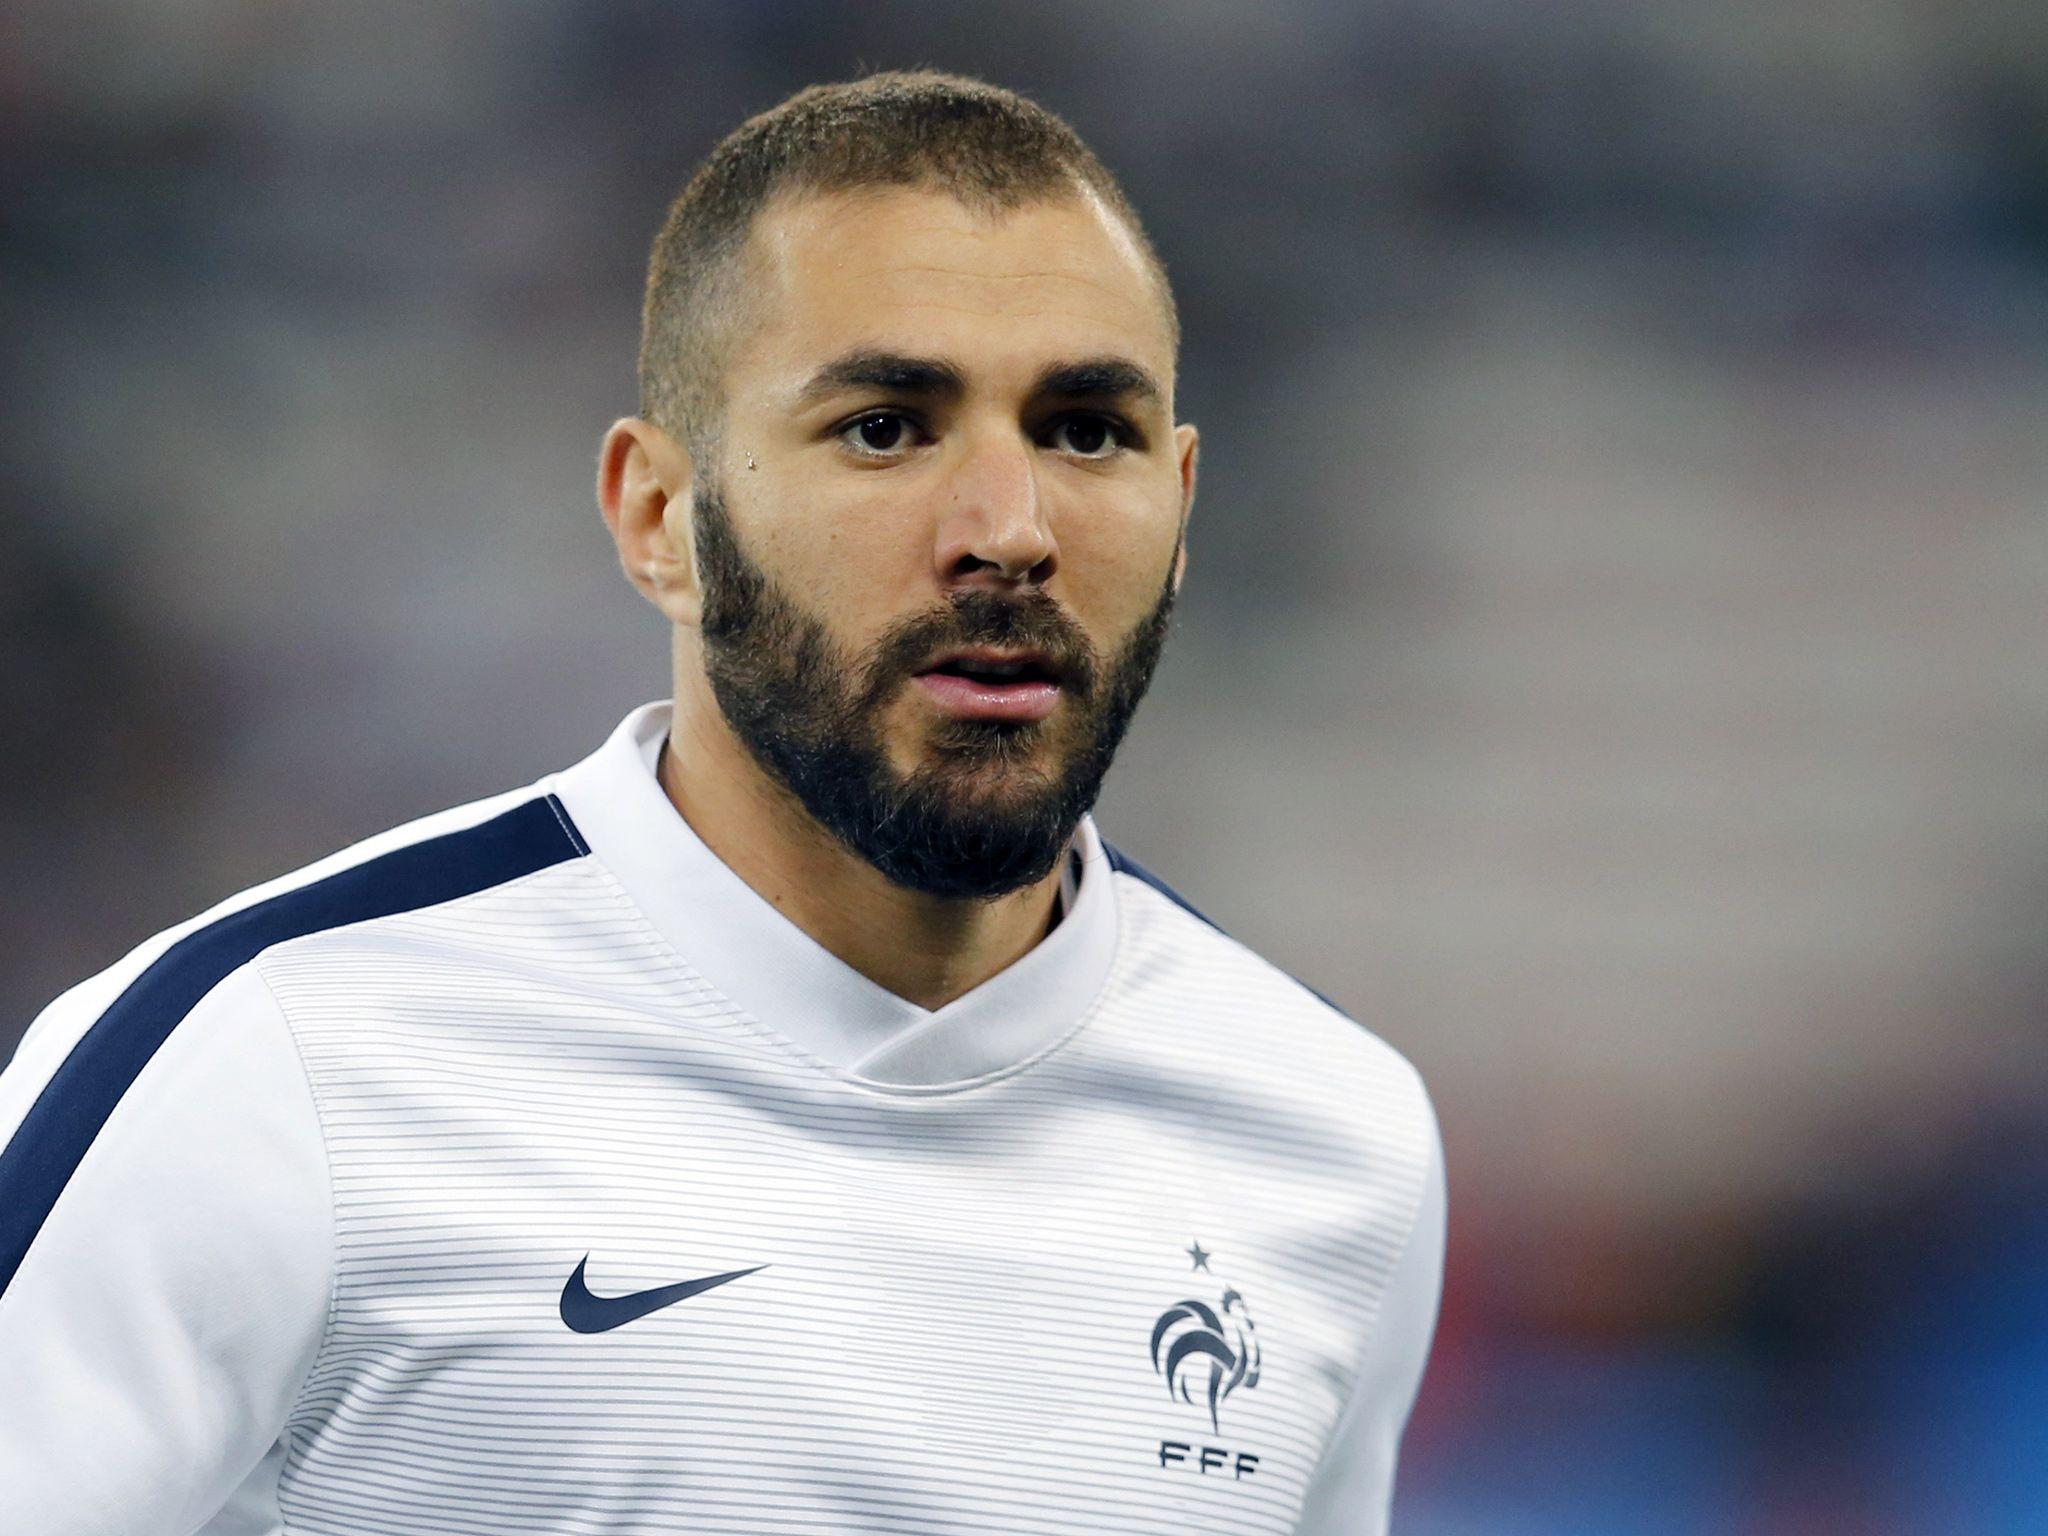 Lesser Known Facts You Probably Didn't Know About Karim Benzema